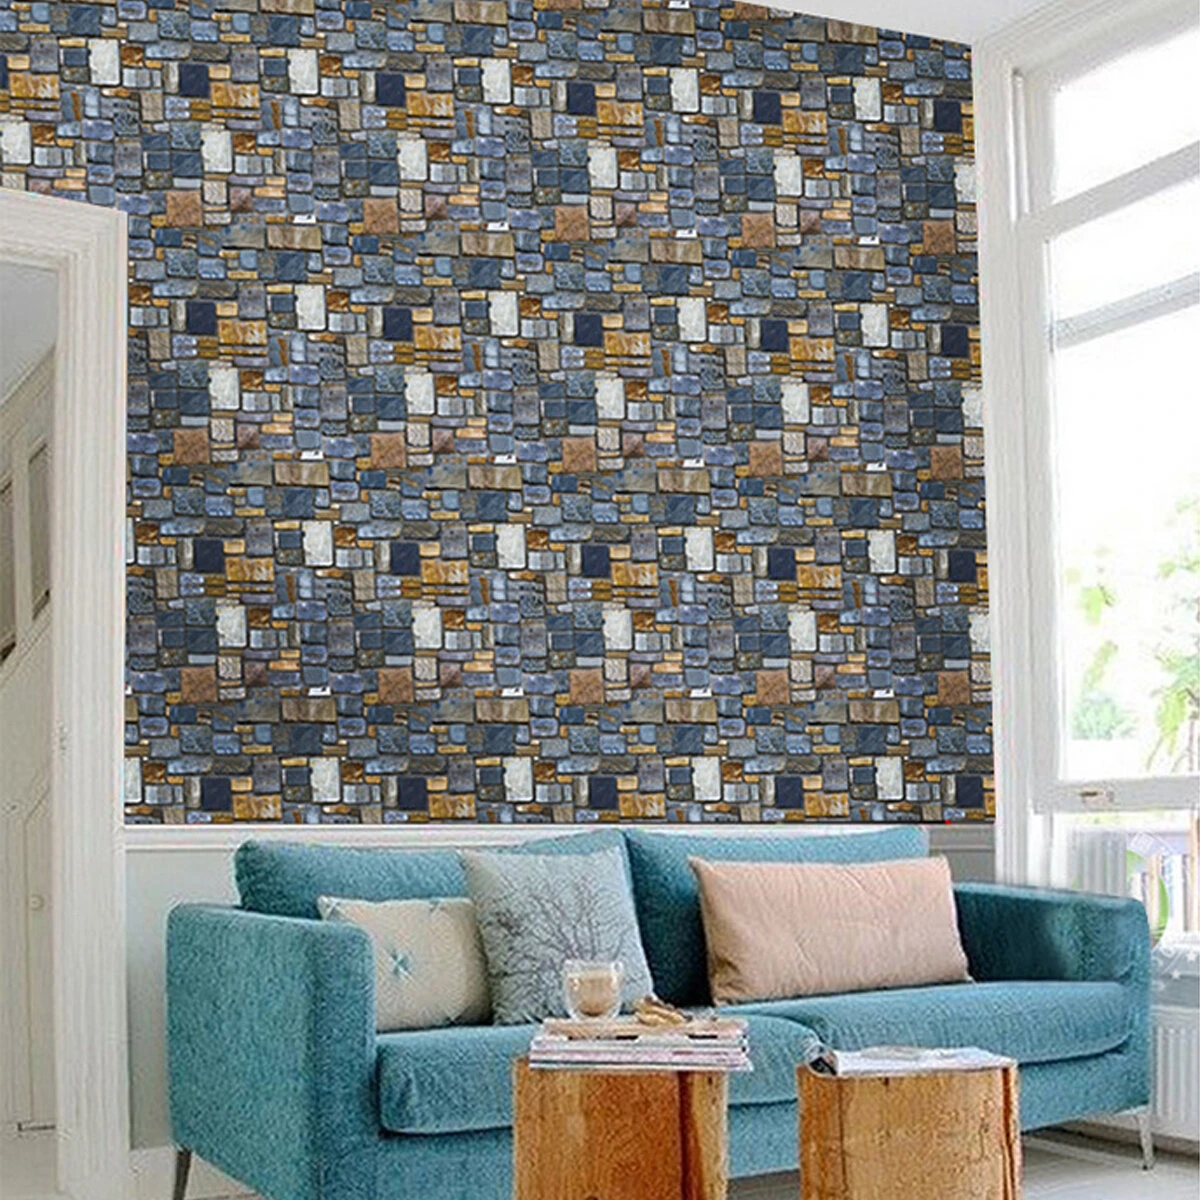 3d waterproof wall paper brick sticker rolls self-adhesive backdrop 45cm*5/10m for bedroom living room decoration